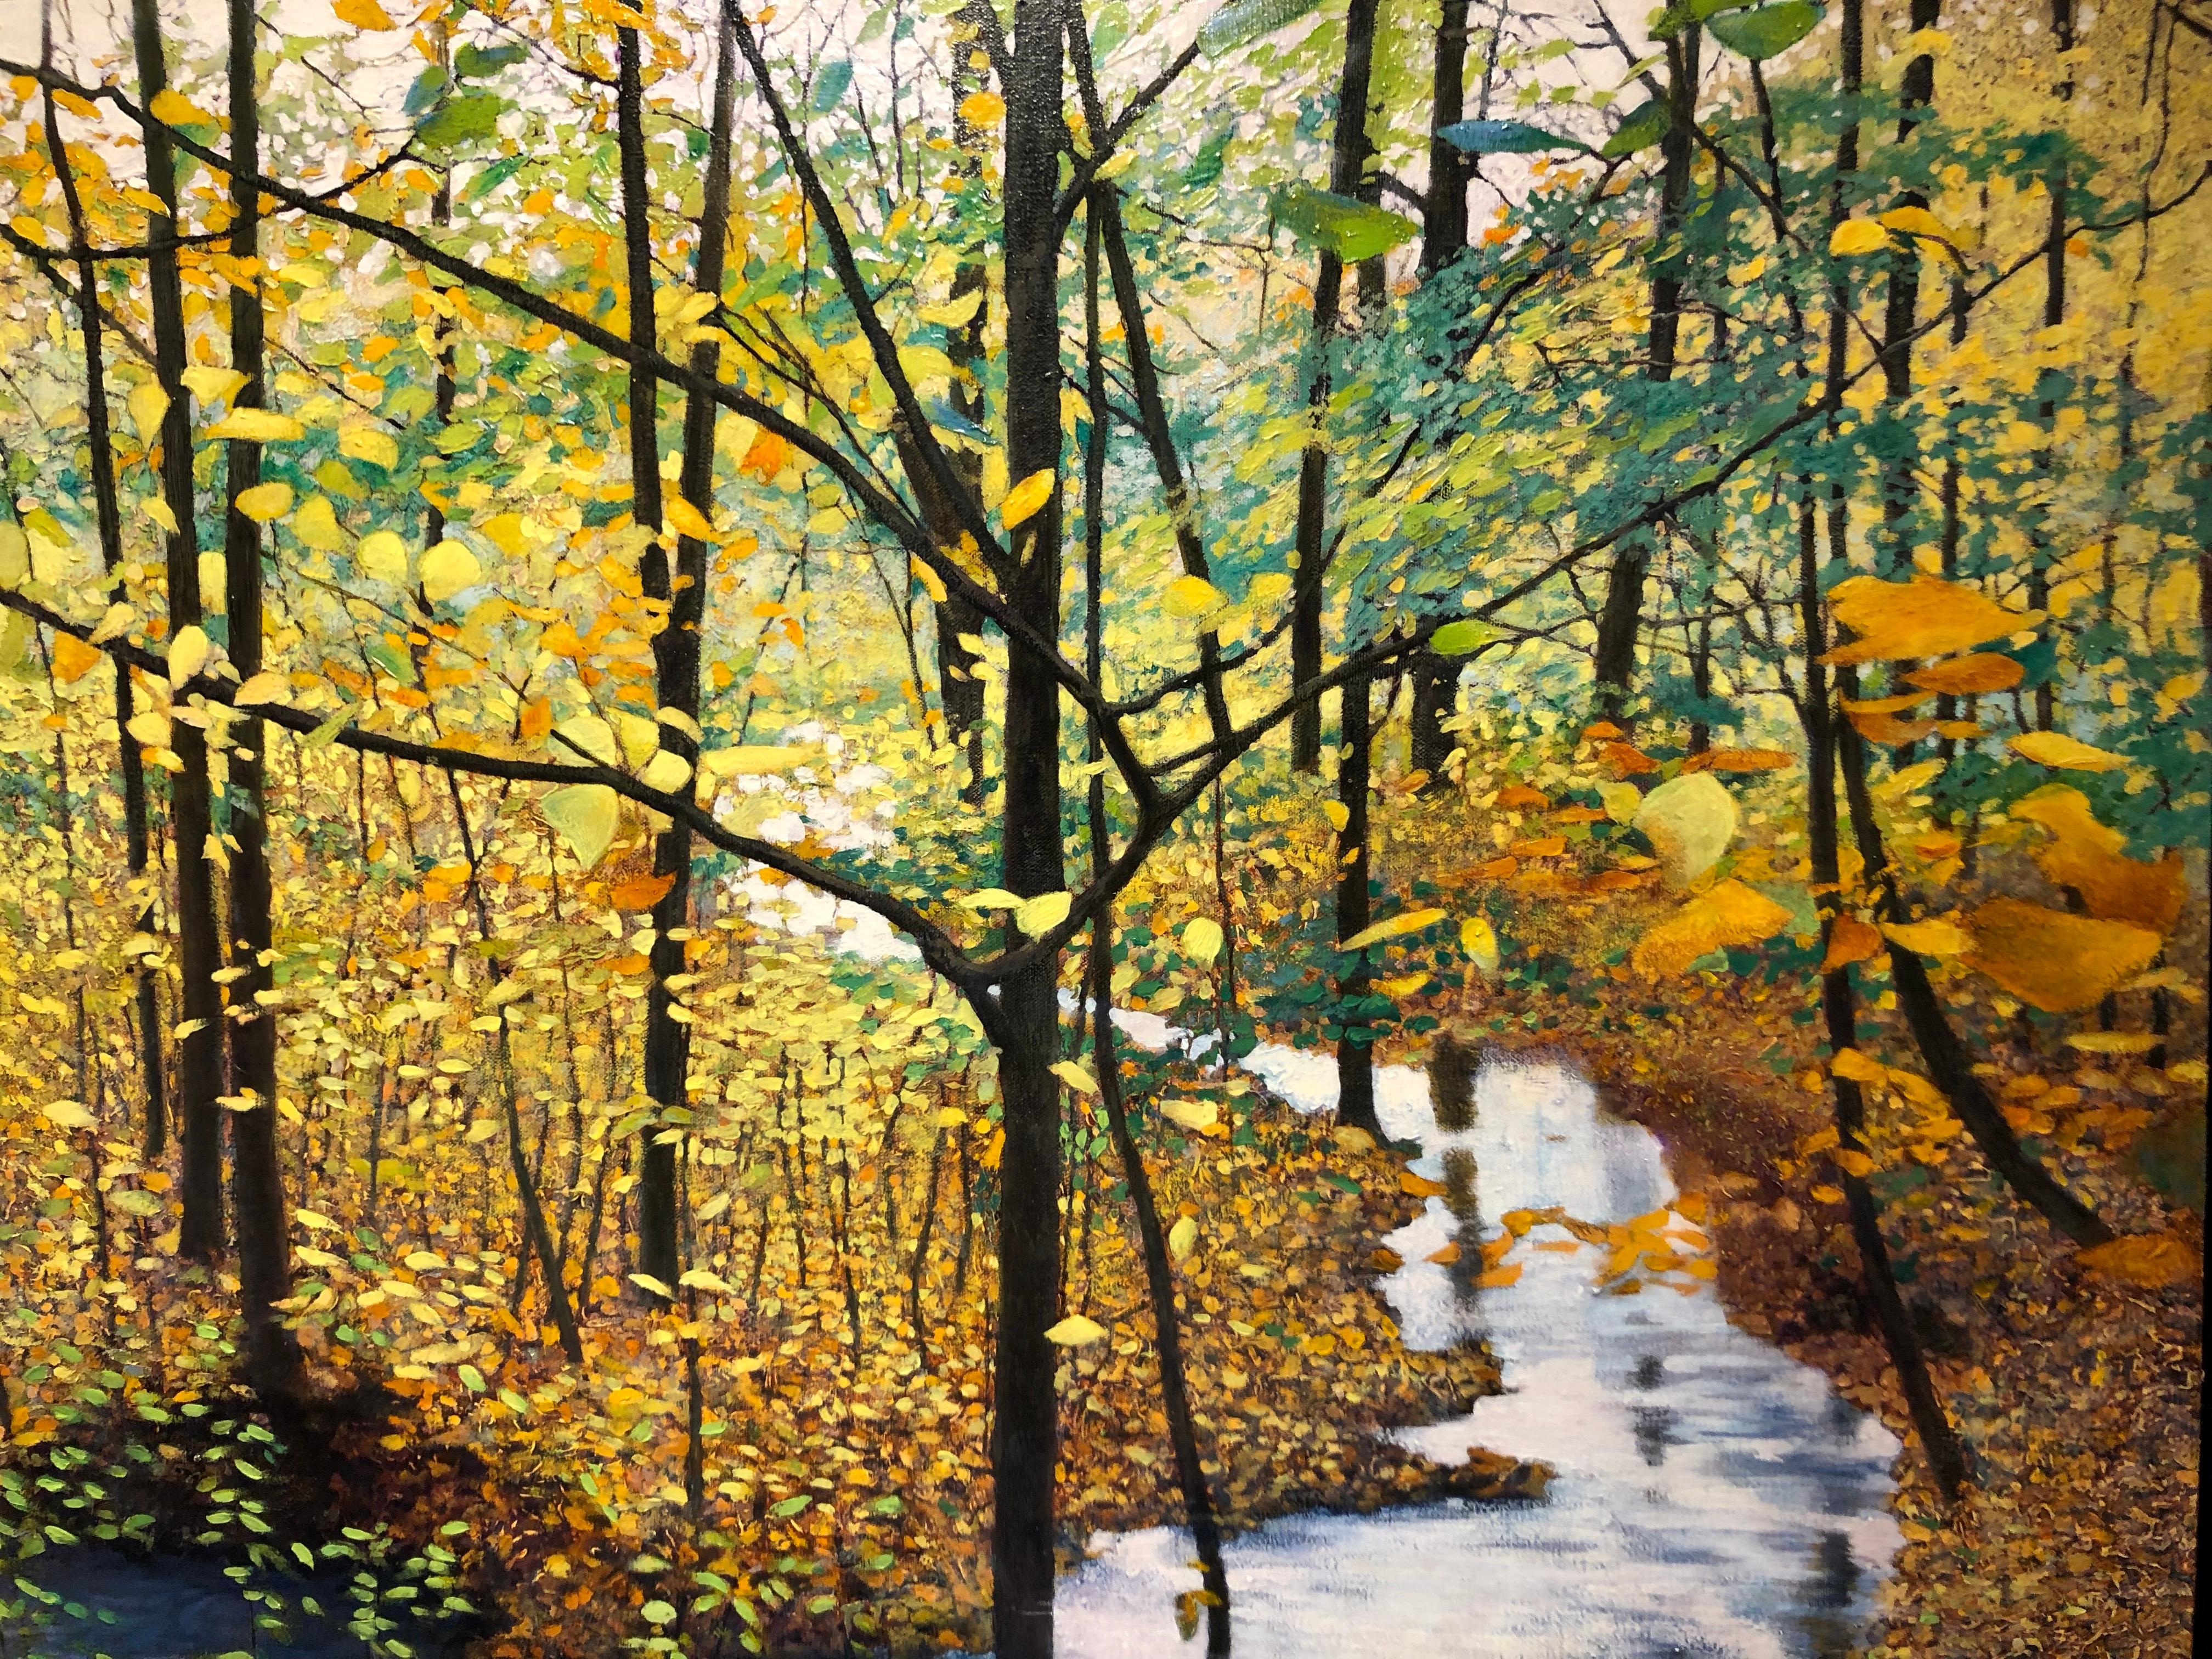 The Turning - Original Oil Painting of Stream and Trees with Leaf Covered Forest 4